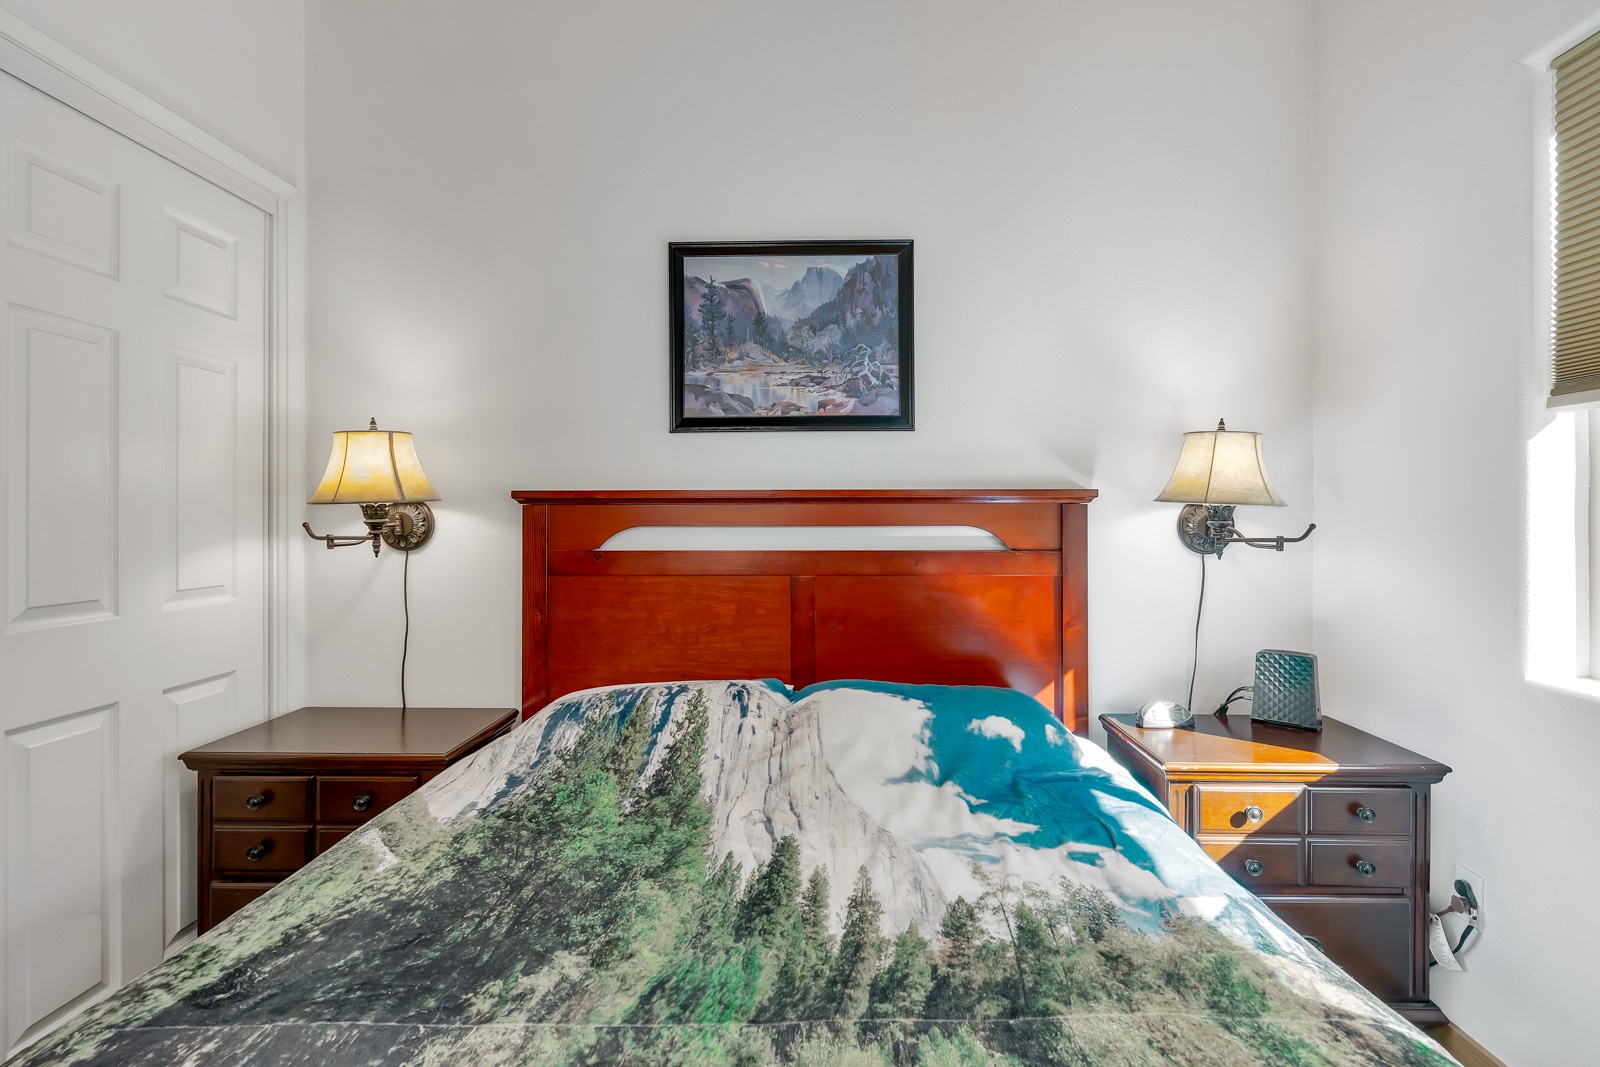 The private bedroom offers soaring ceilings & a regal queen-sized bed